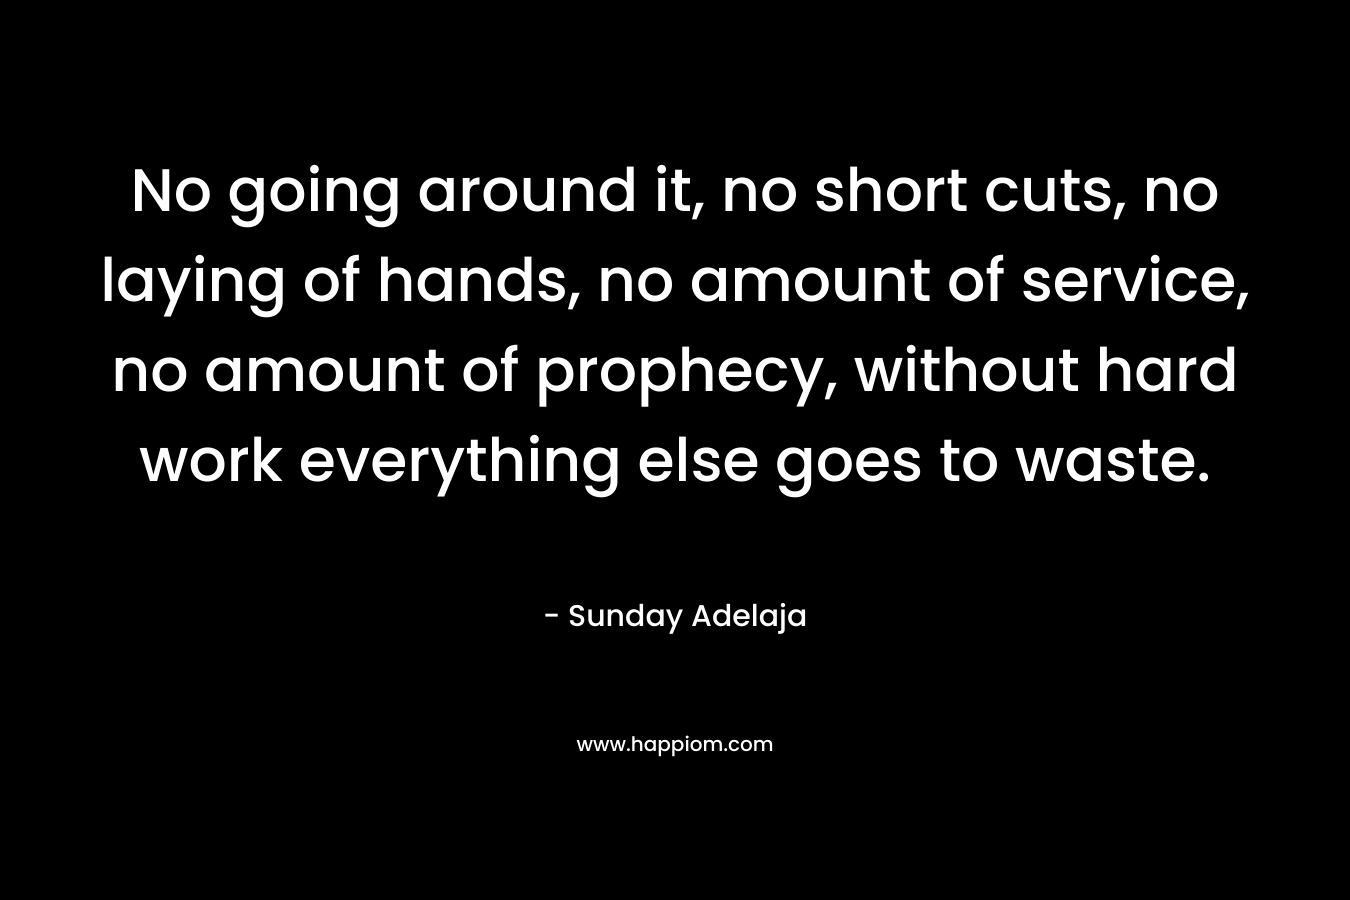 No going around it, no short cuts, no laying of hands, no amount of service, no amount of prophecy, without hard work everything else goes to waste.